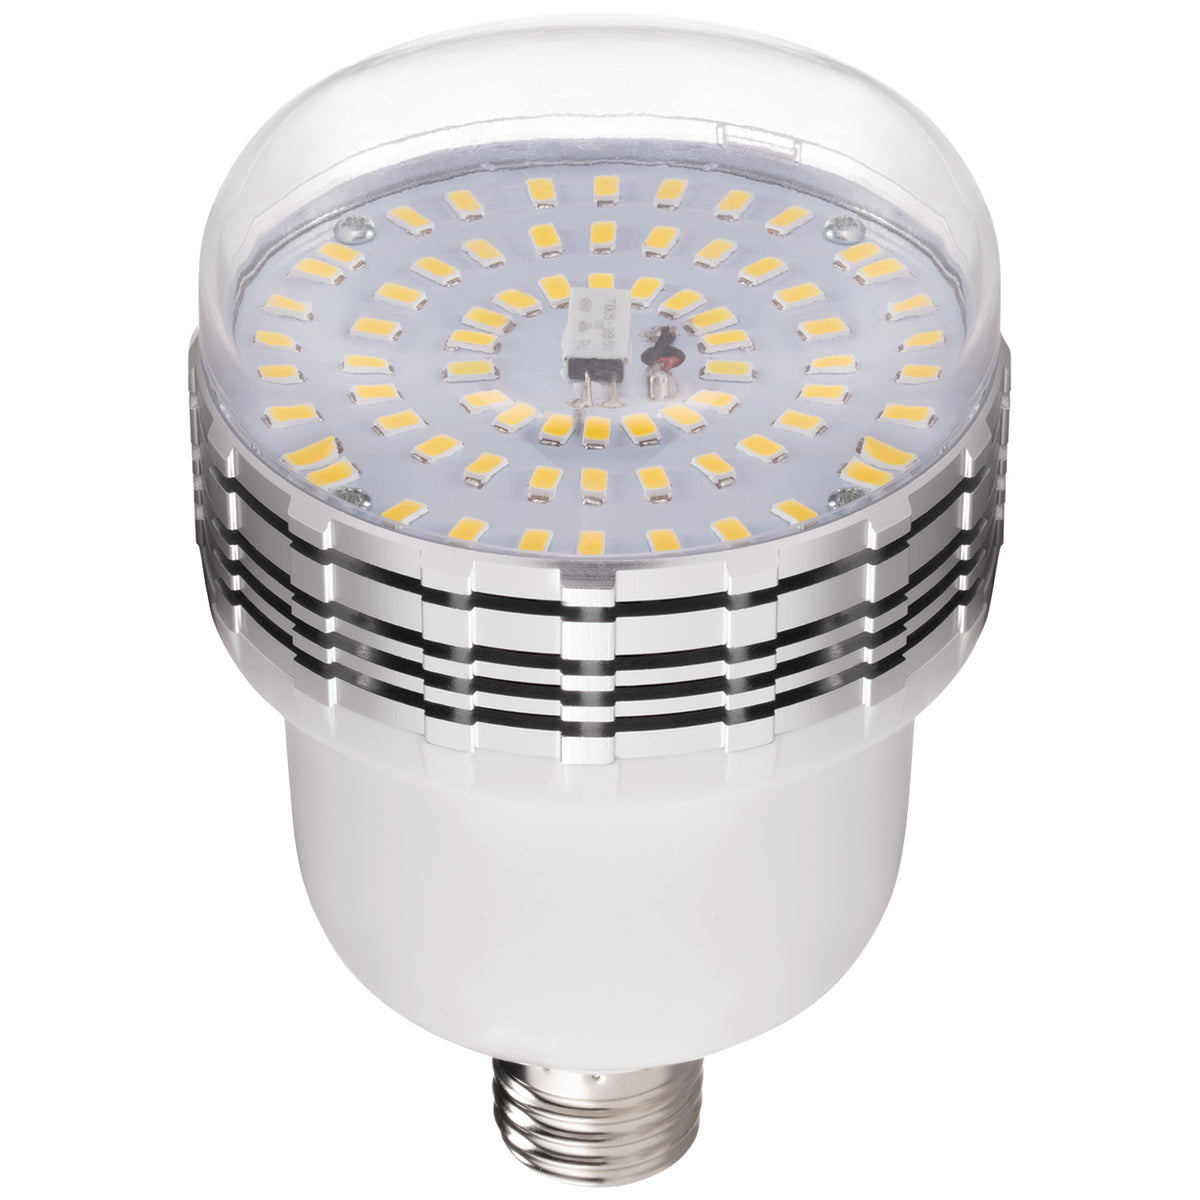 Daylight Dimmable LED Bulb with Tungsten Cap (45W)